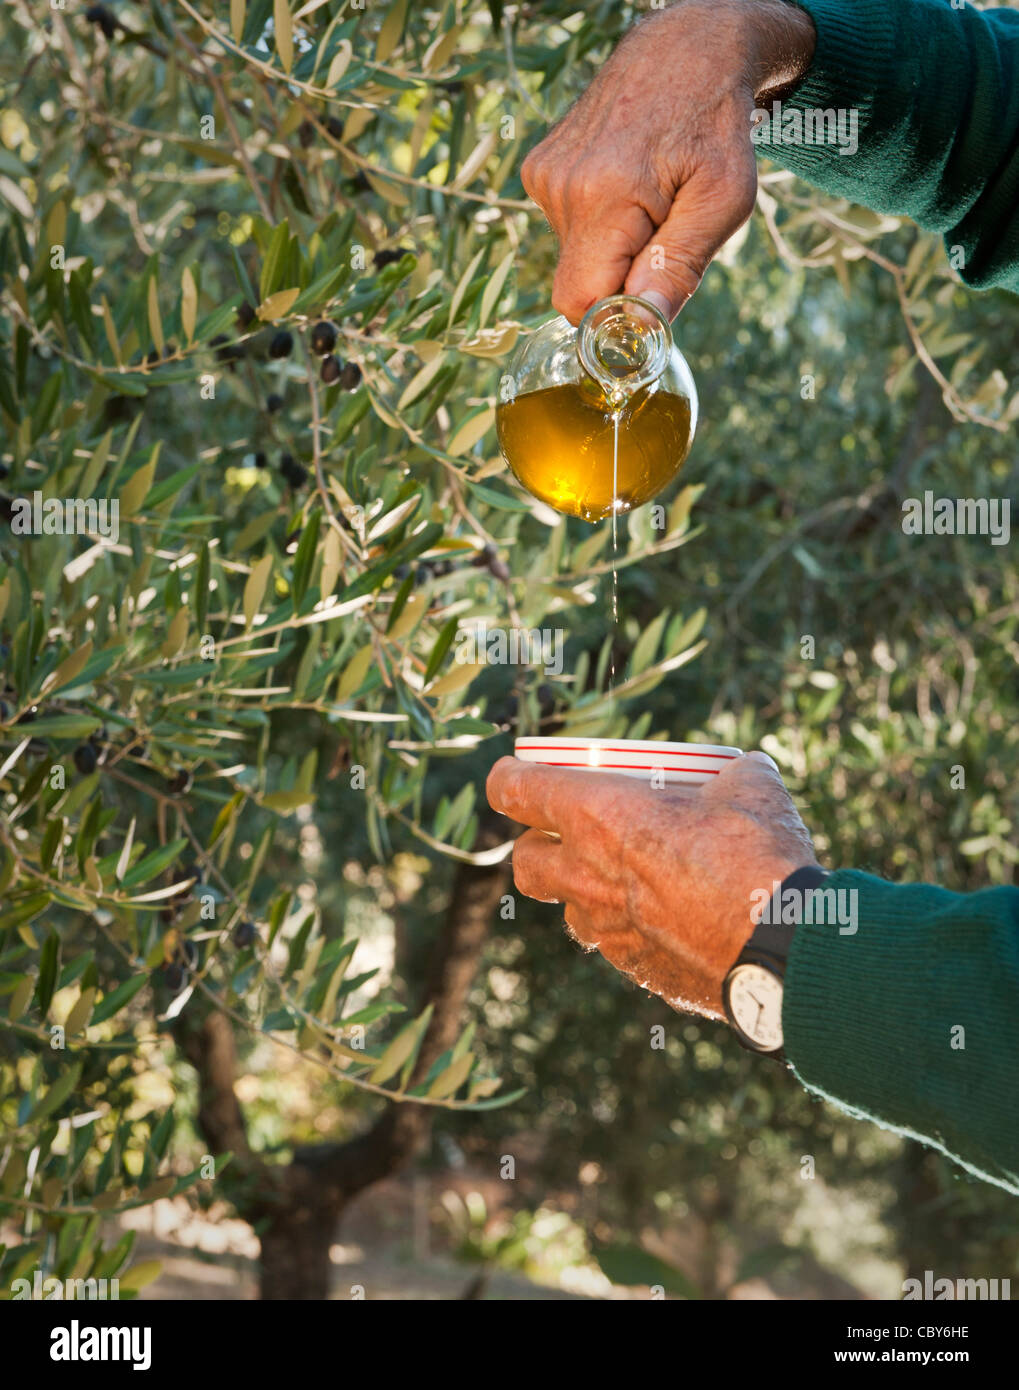 Italian olive farmer pouring oil against backdrop of olive trees where they were grown in Montecarotto, Ancona region of Italy Stock Photo